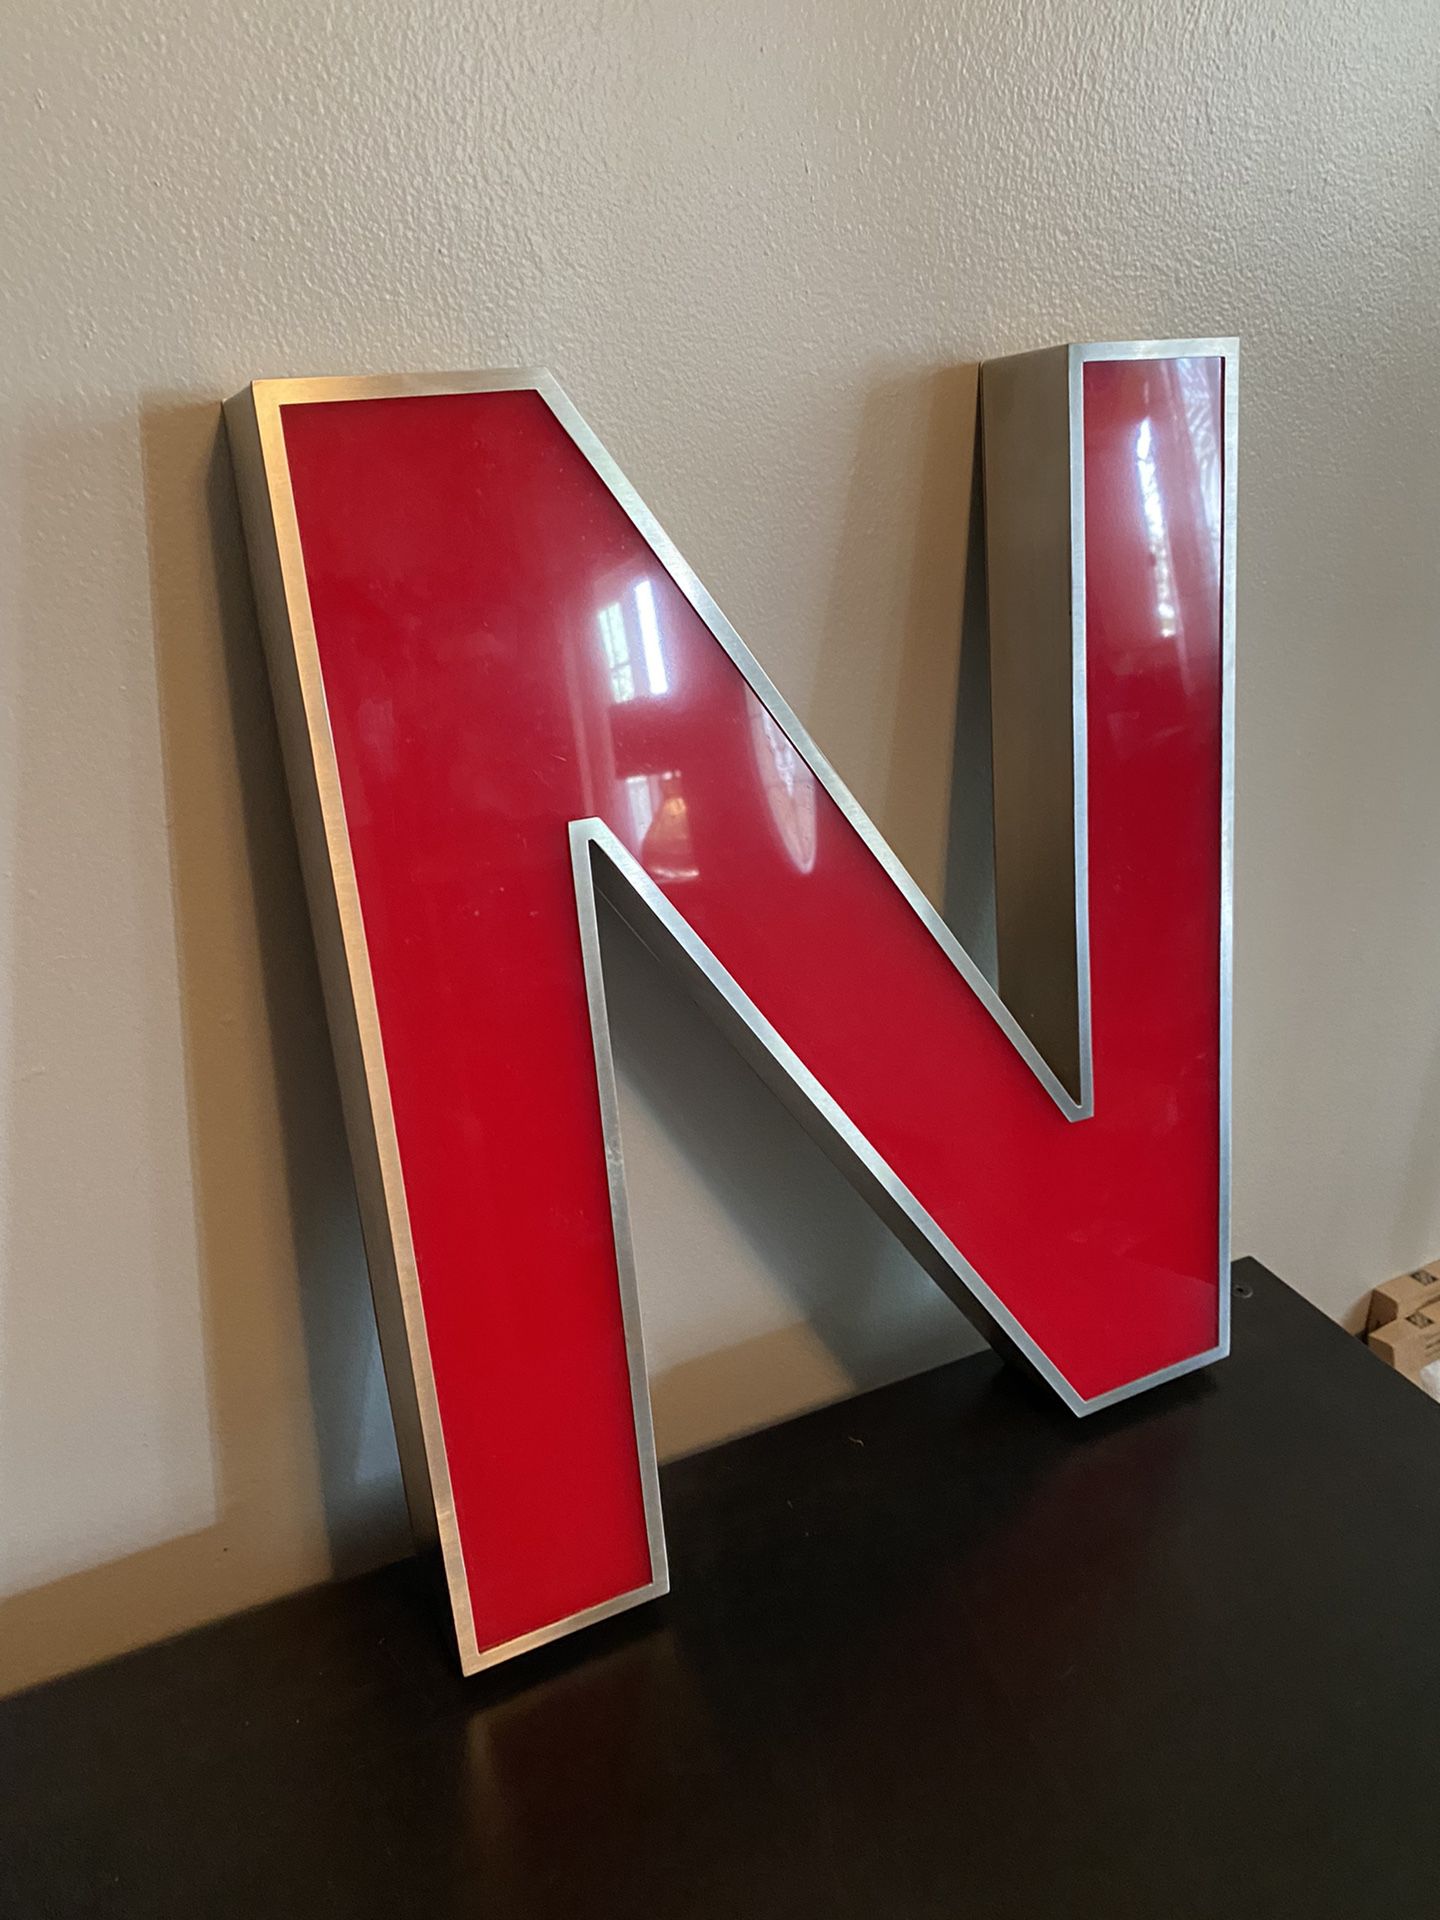 Metal And Glass “N” Letter